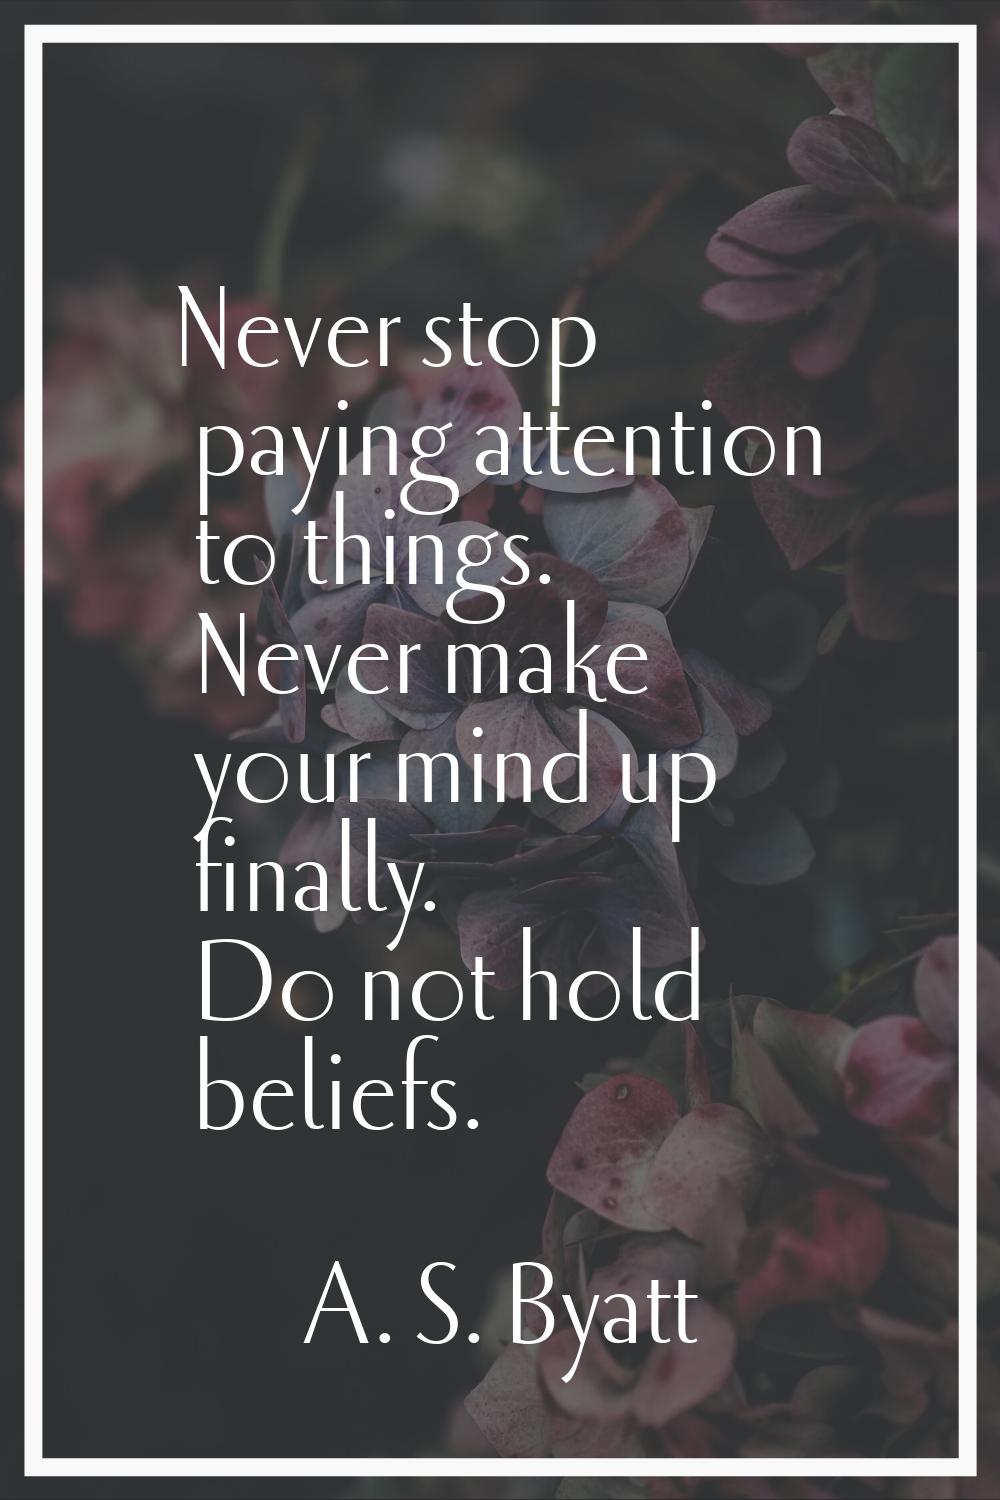 Never stop paying attention to things. Never make your mind up finally. Do not hold beliefs.